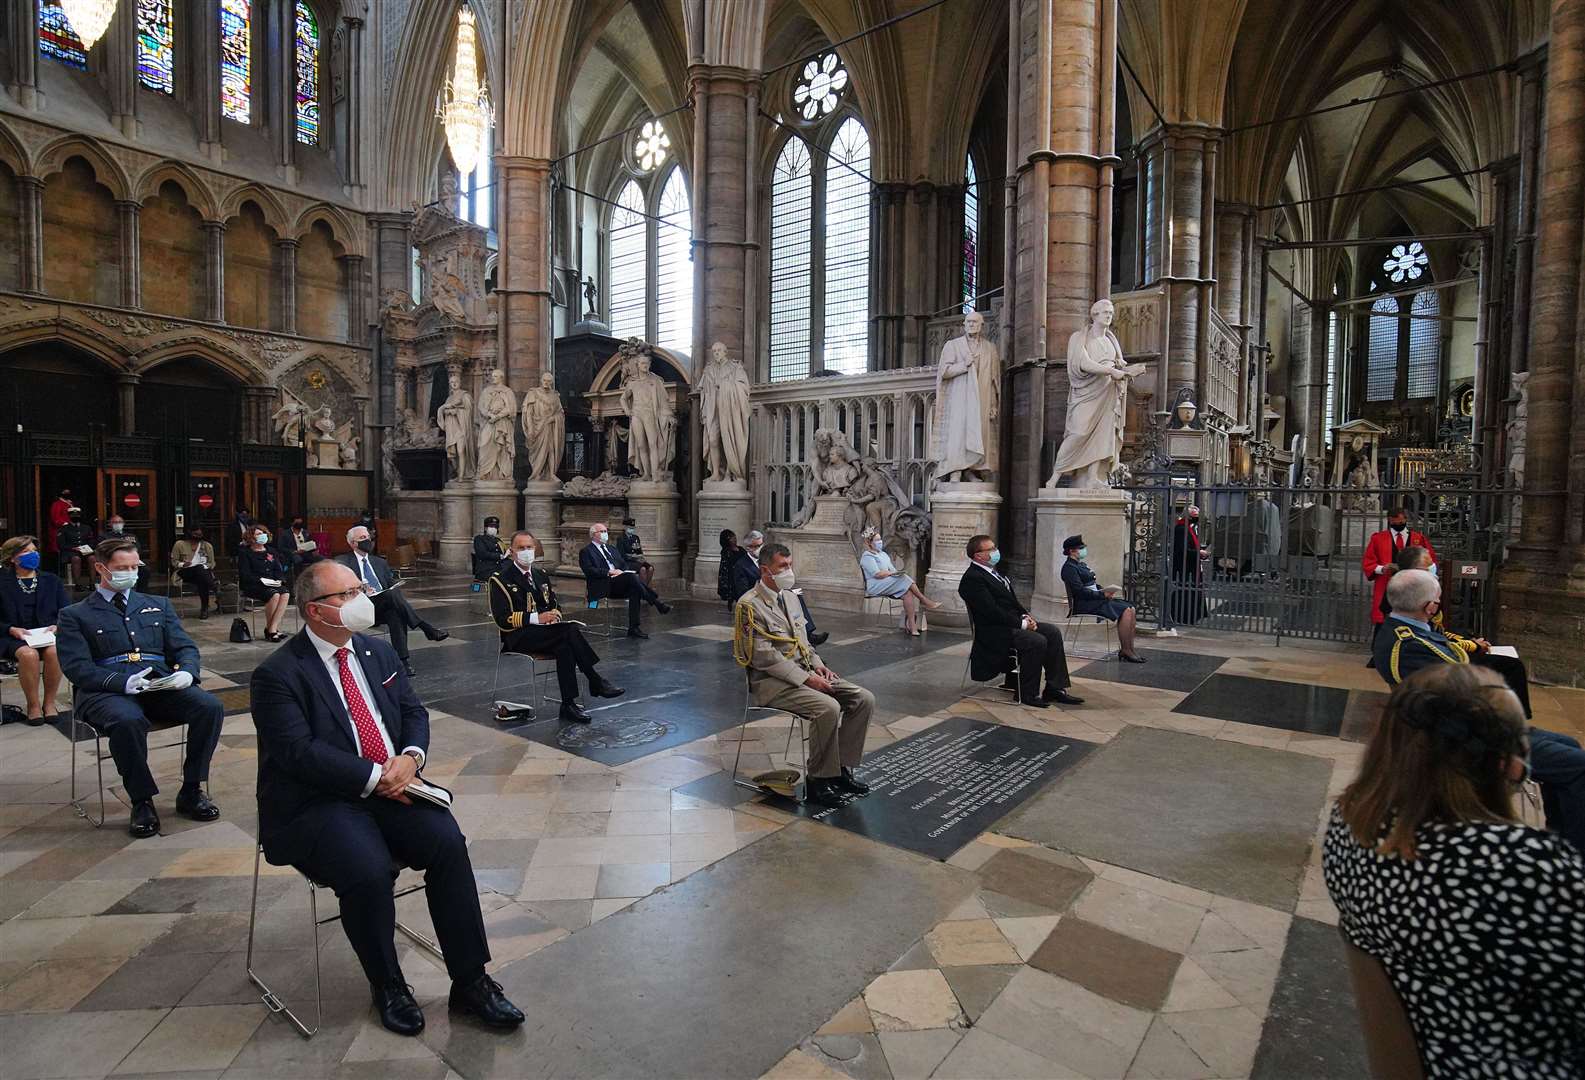 Each chair was spaced out two metres apart to allow social distancing (Aaron Chown/PA)